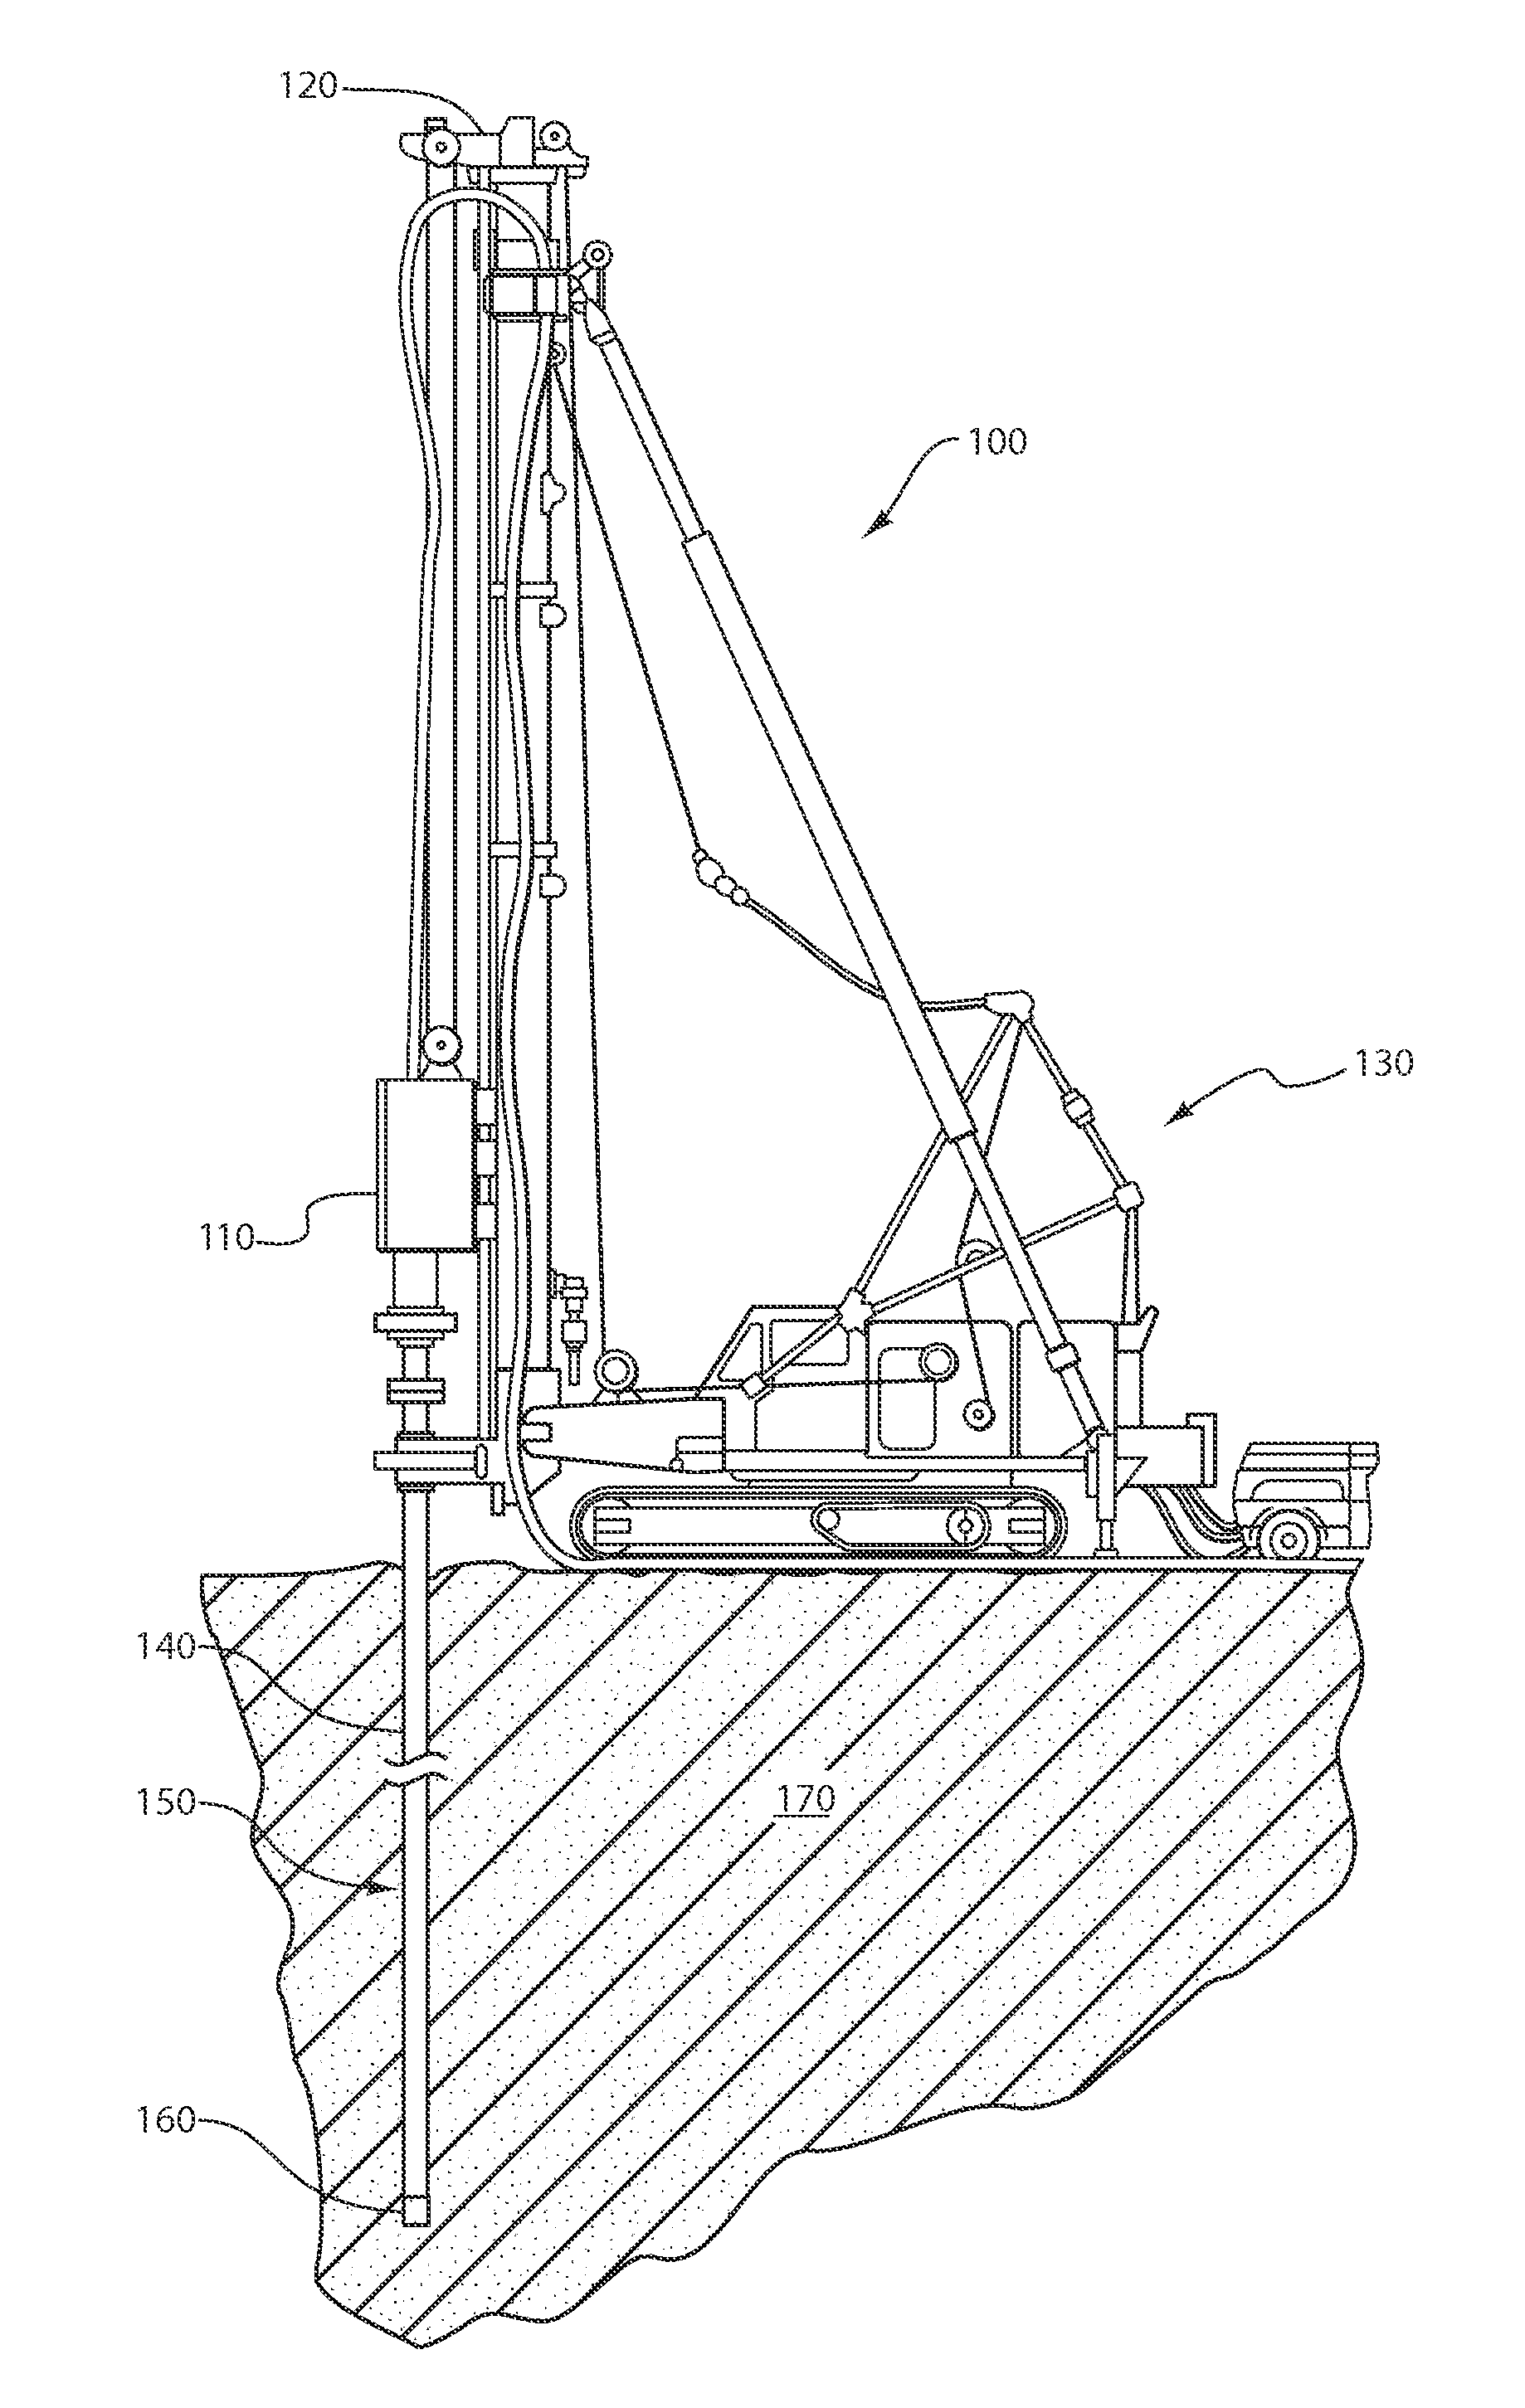 Impregnated drilling tools including elongated structures